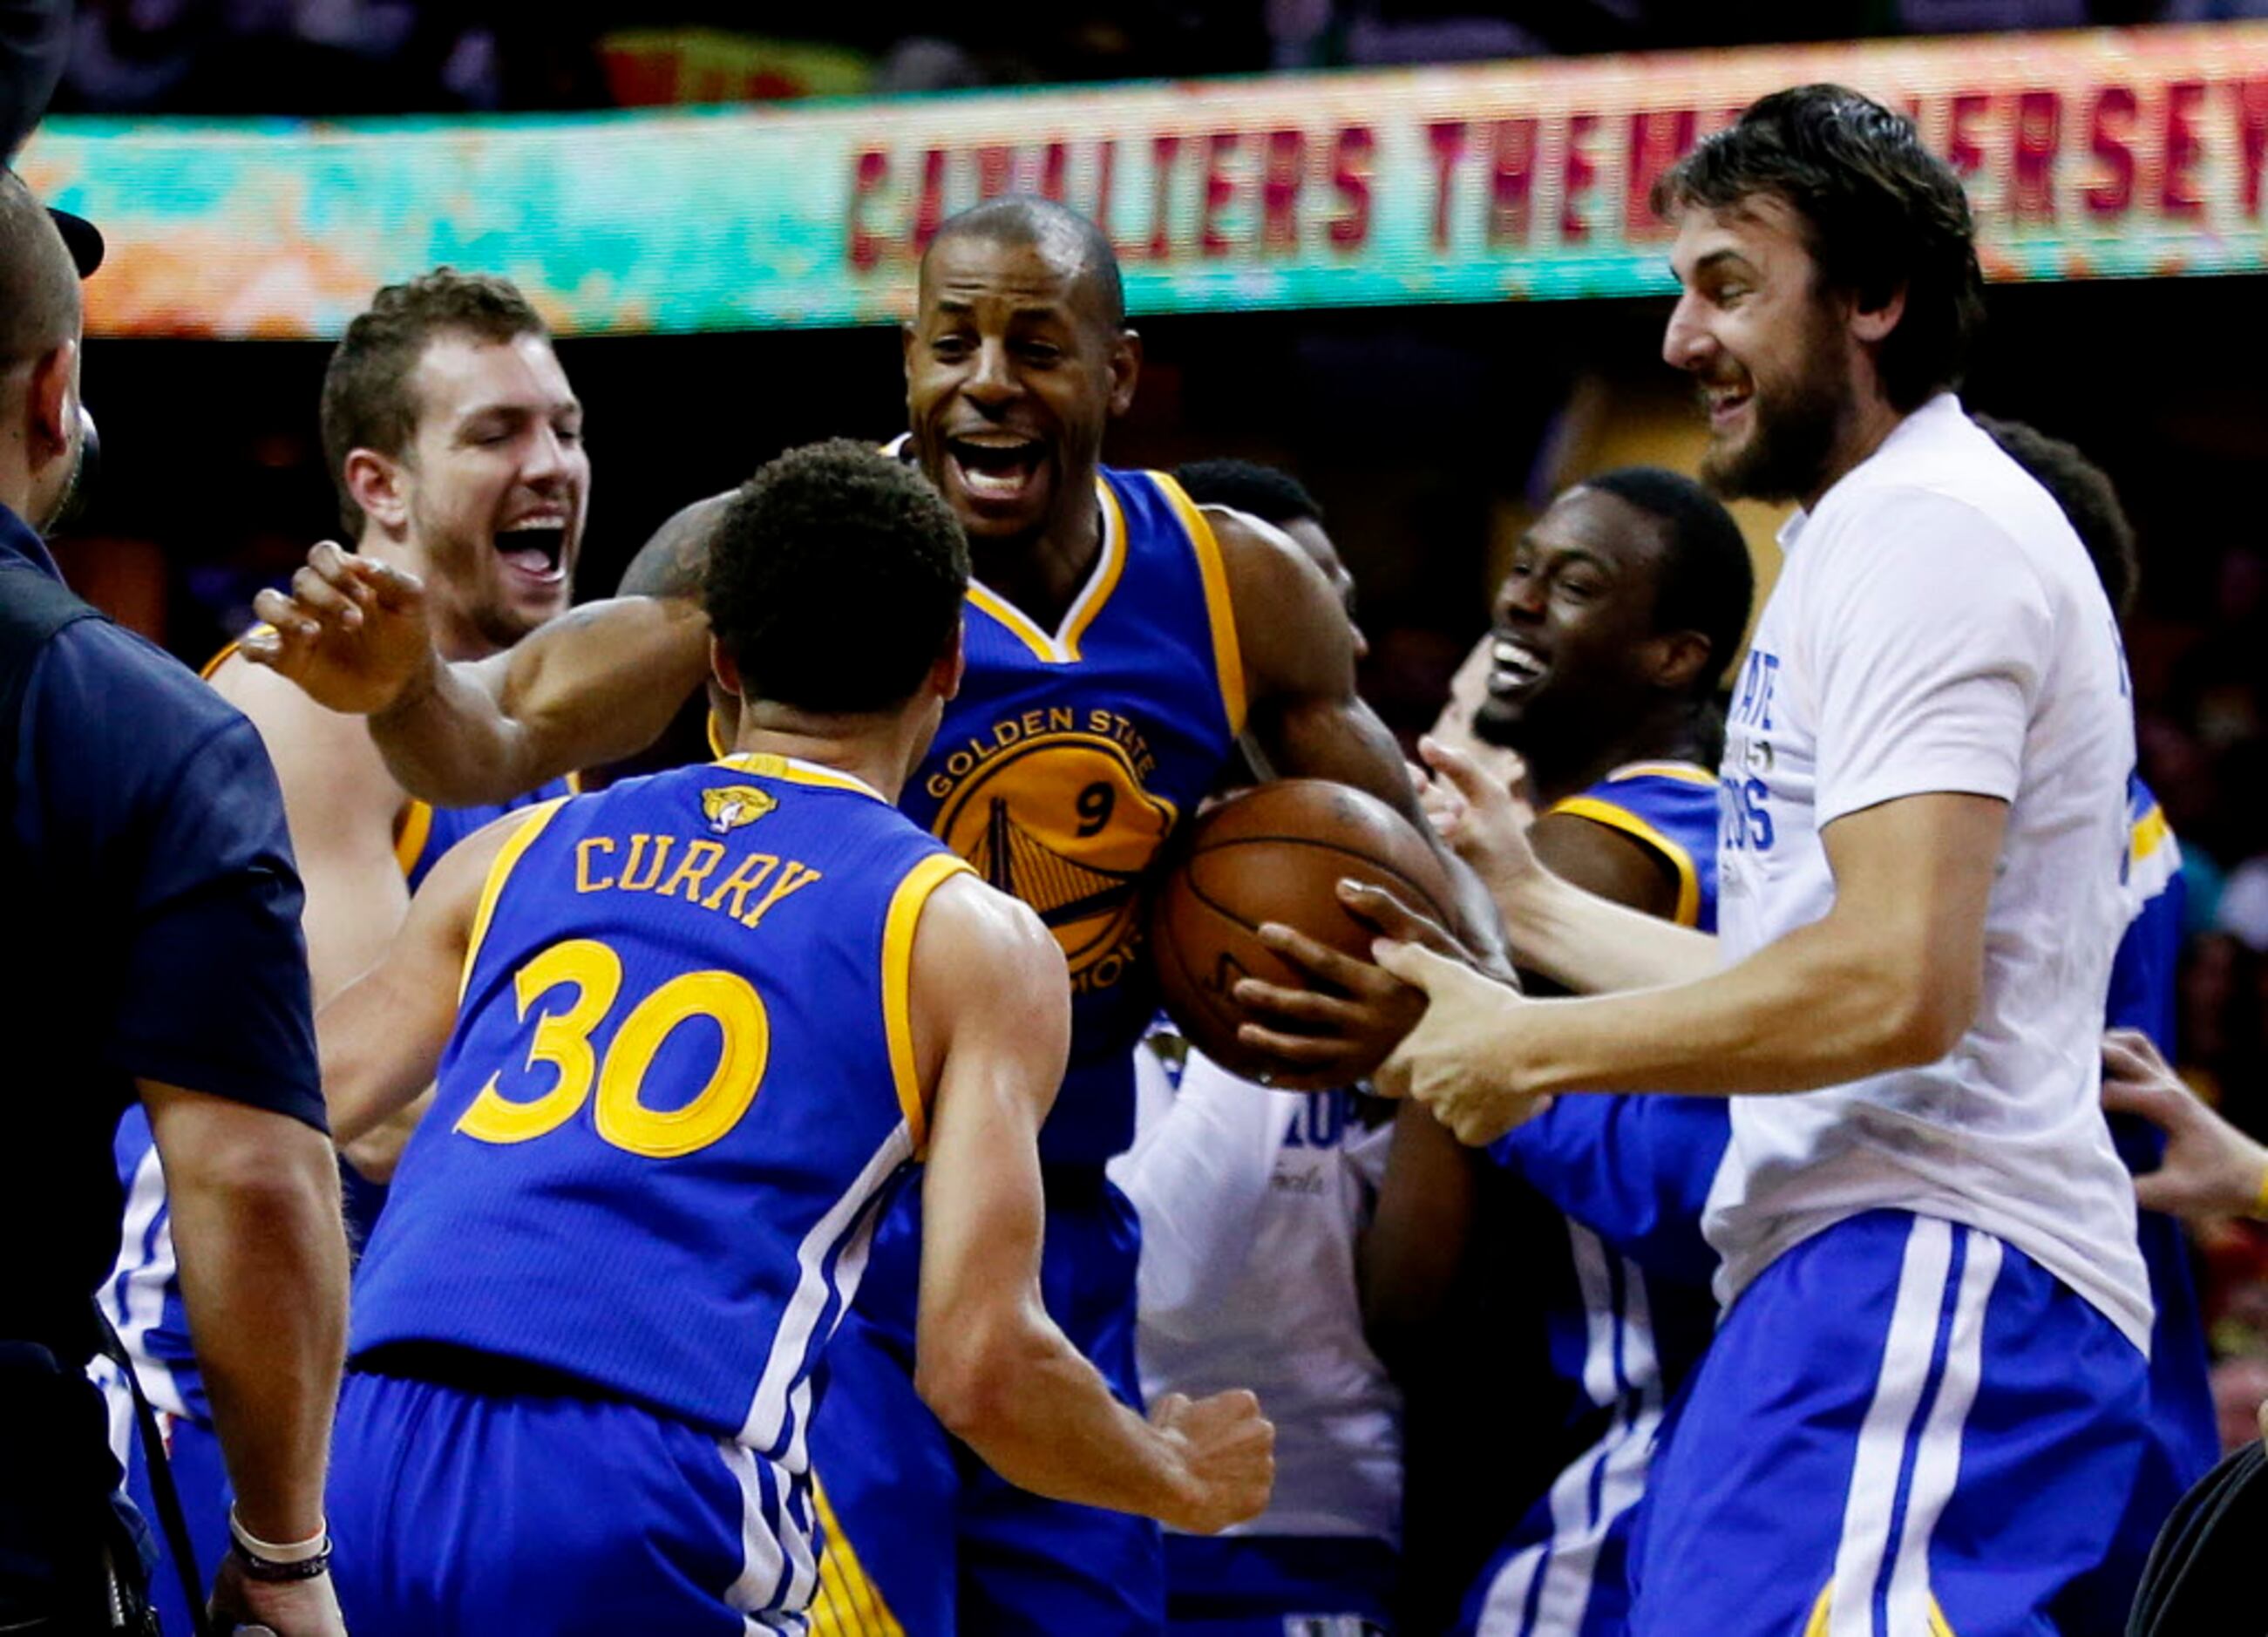 Warriors win NBA title, down LeBron, Cavs 105-97 in Game 6 - The